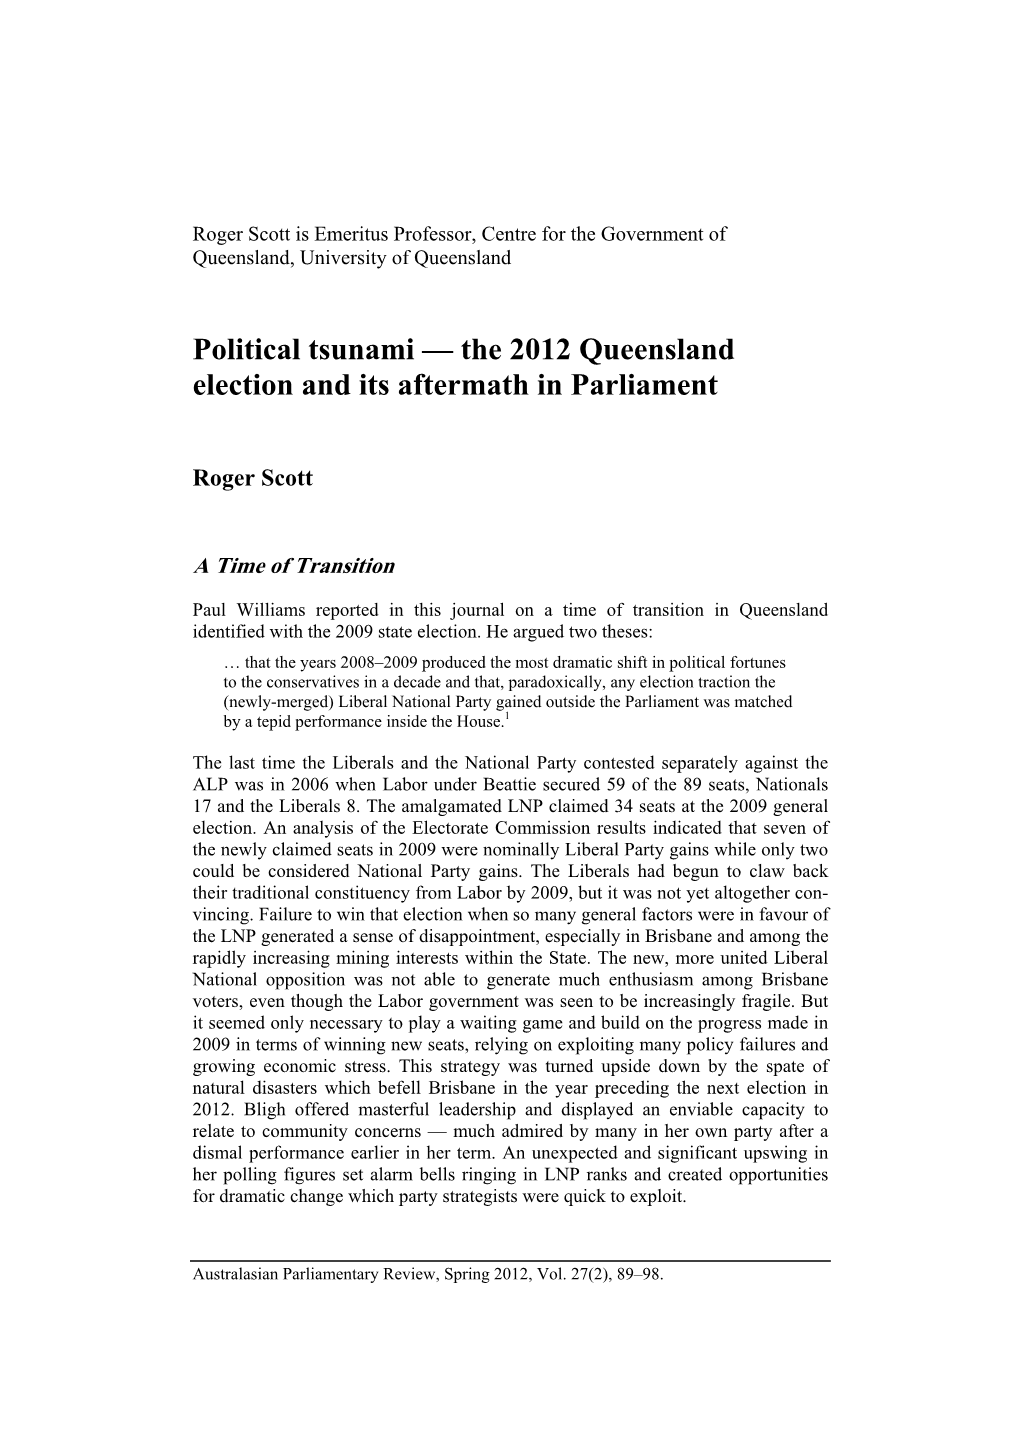 The 2012 Queensland Election and Its Aftermath in Parliament